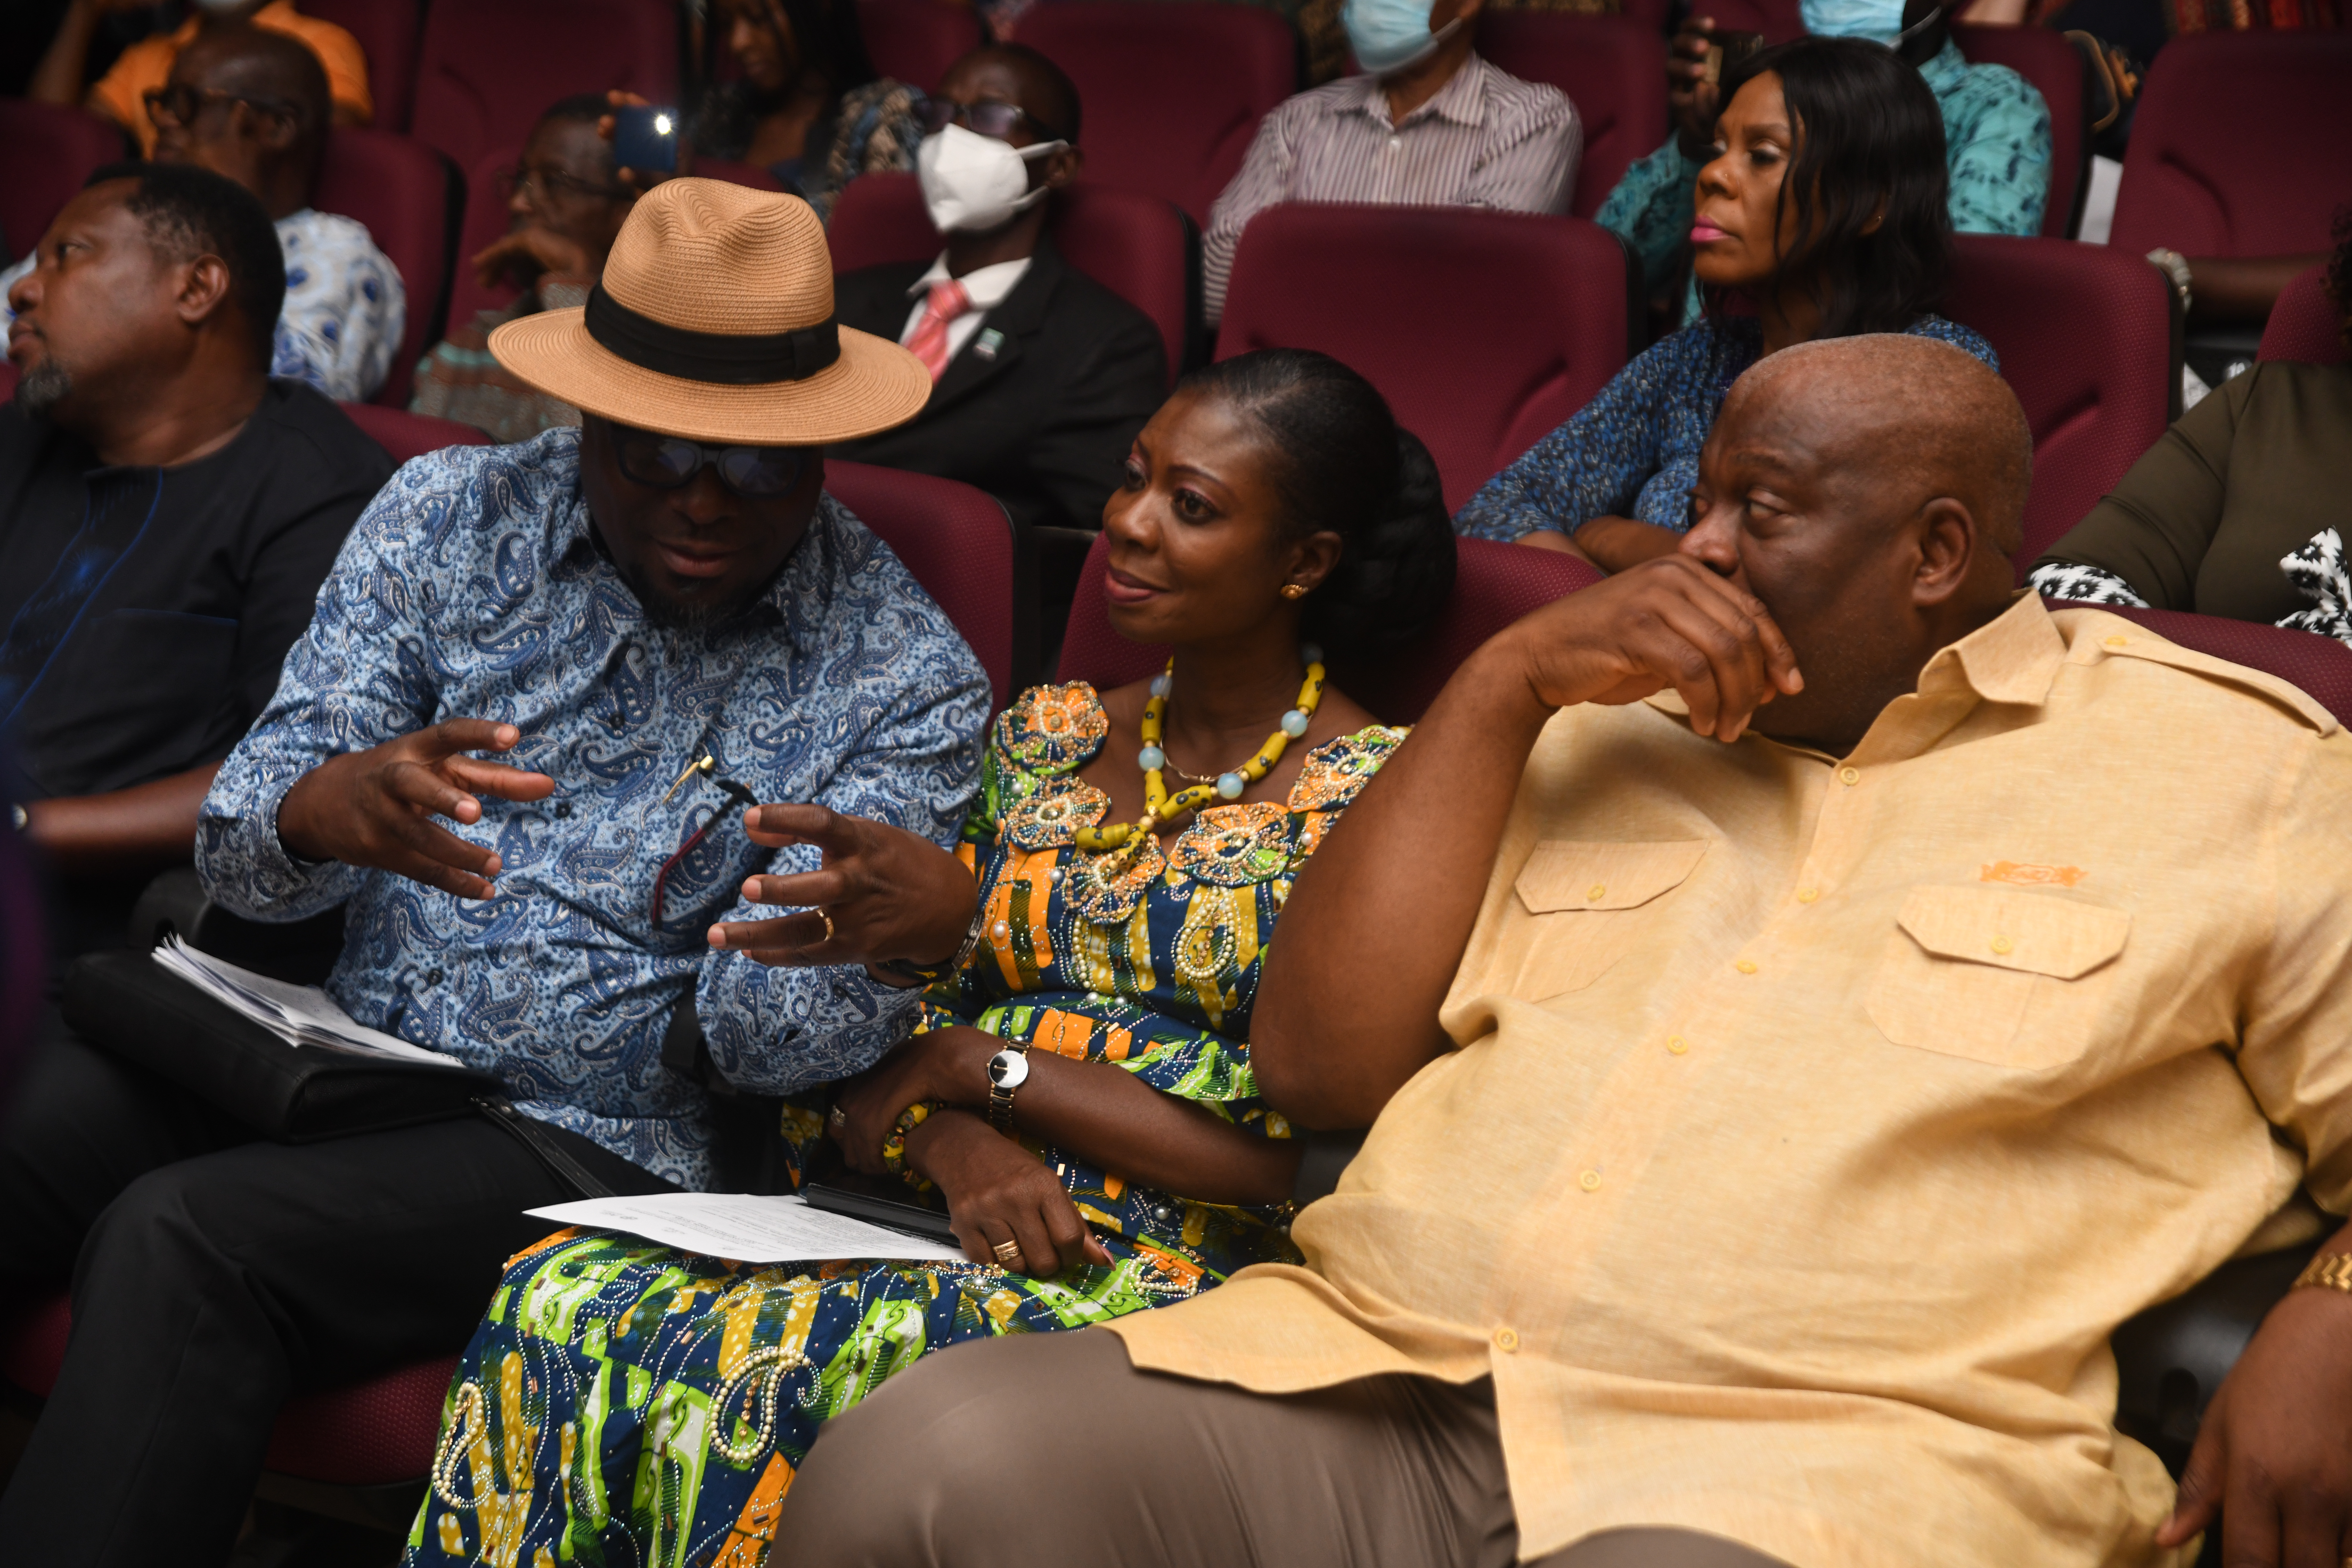 Dr H. Kwesi Ayim Darke(3rd from right), President of the Association of Ghana Industries(AGI) interacting with  Henry Quartey(right), Greater Accra Regional Minister and  Kate Quartey Papafio (2nd from right), a member of the AGI council.